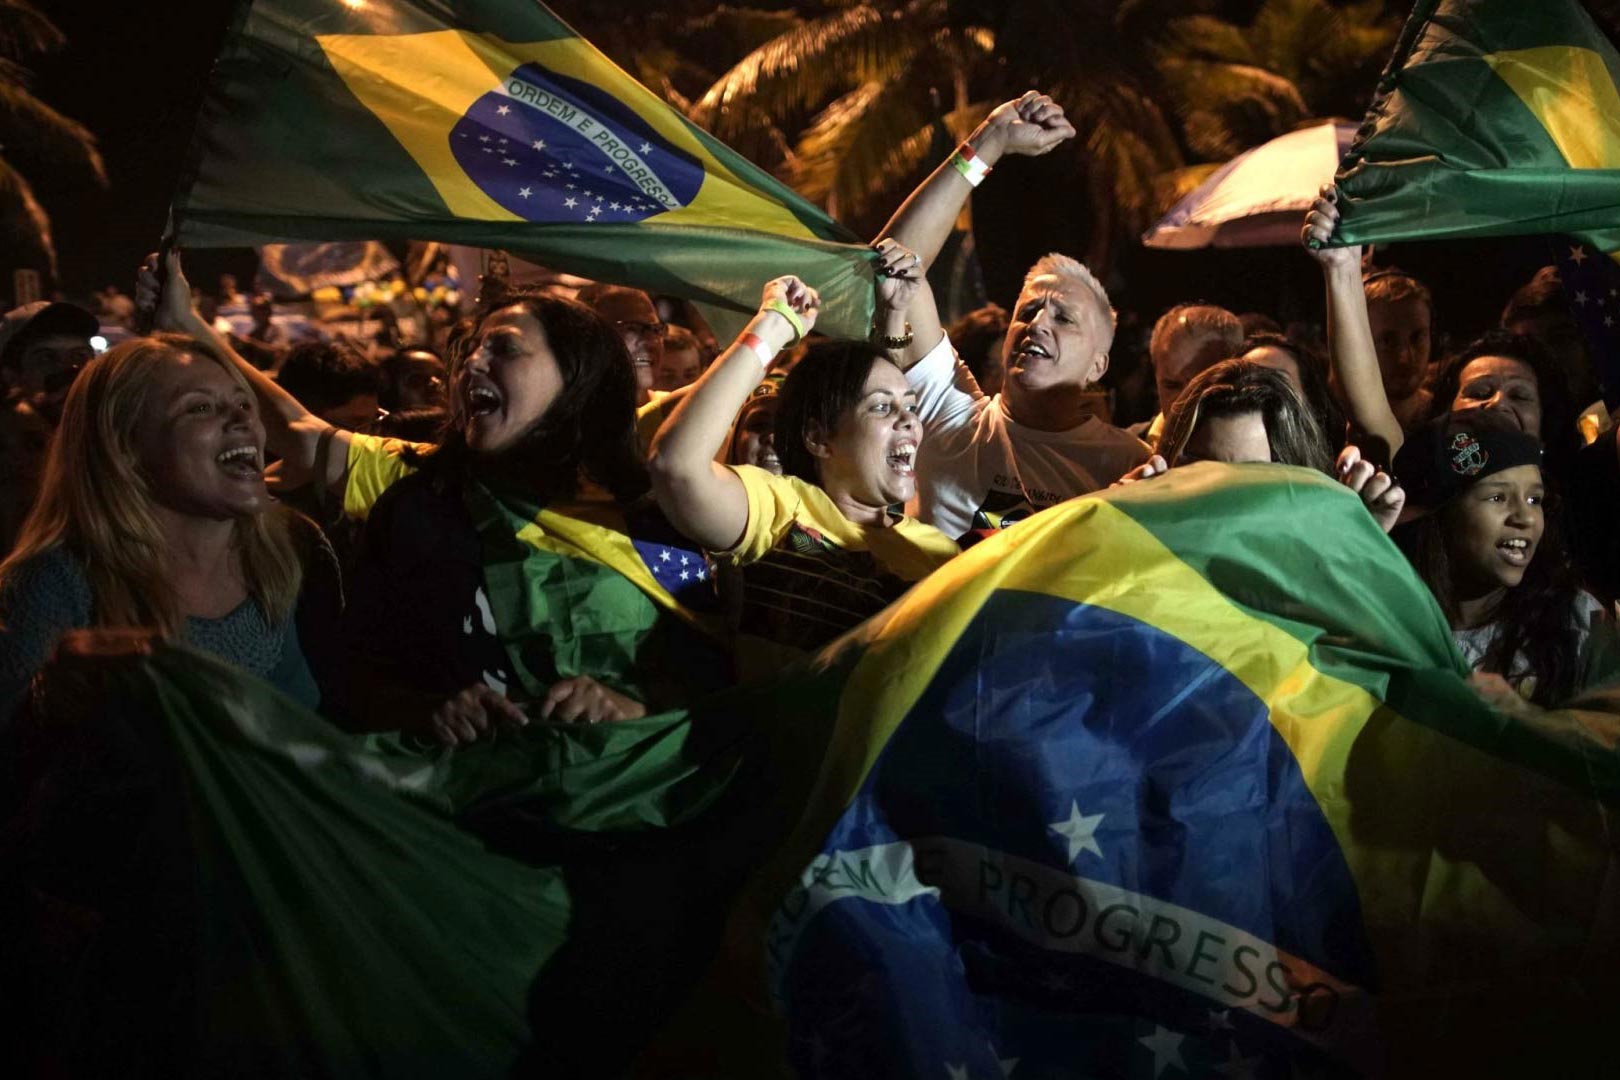 Protestors in Brazil in the streets with flags and people screaming